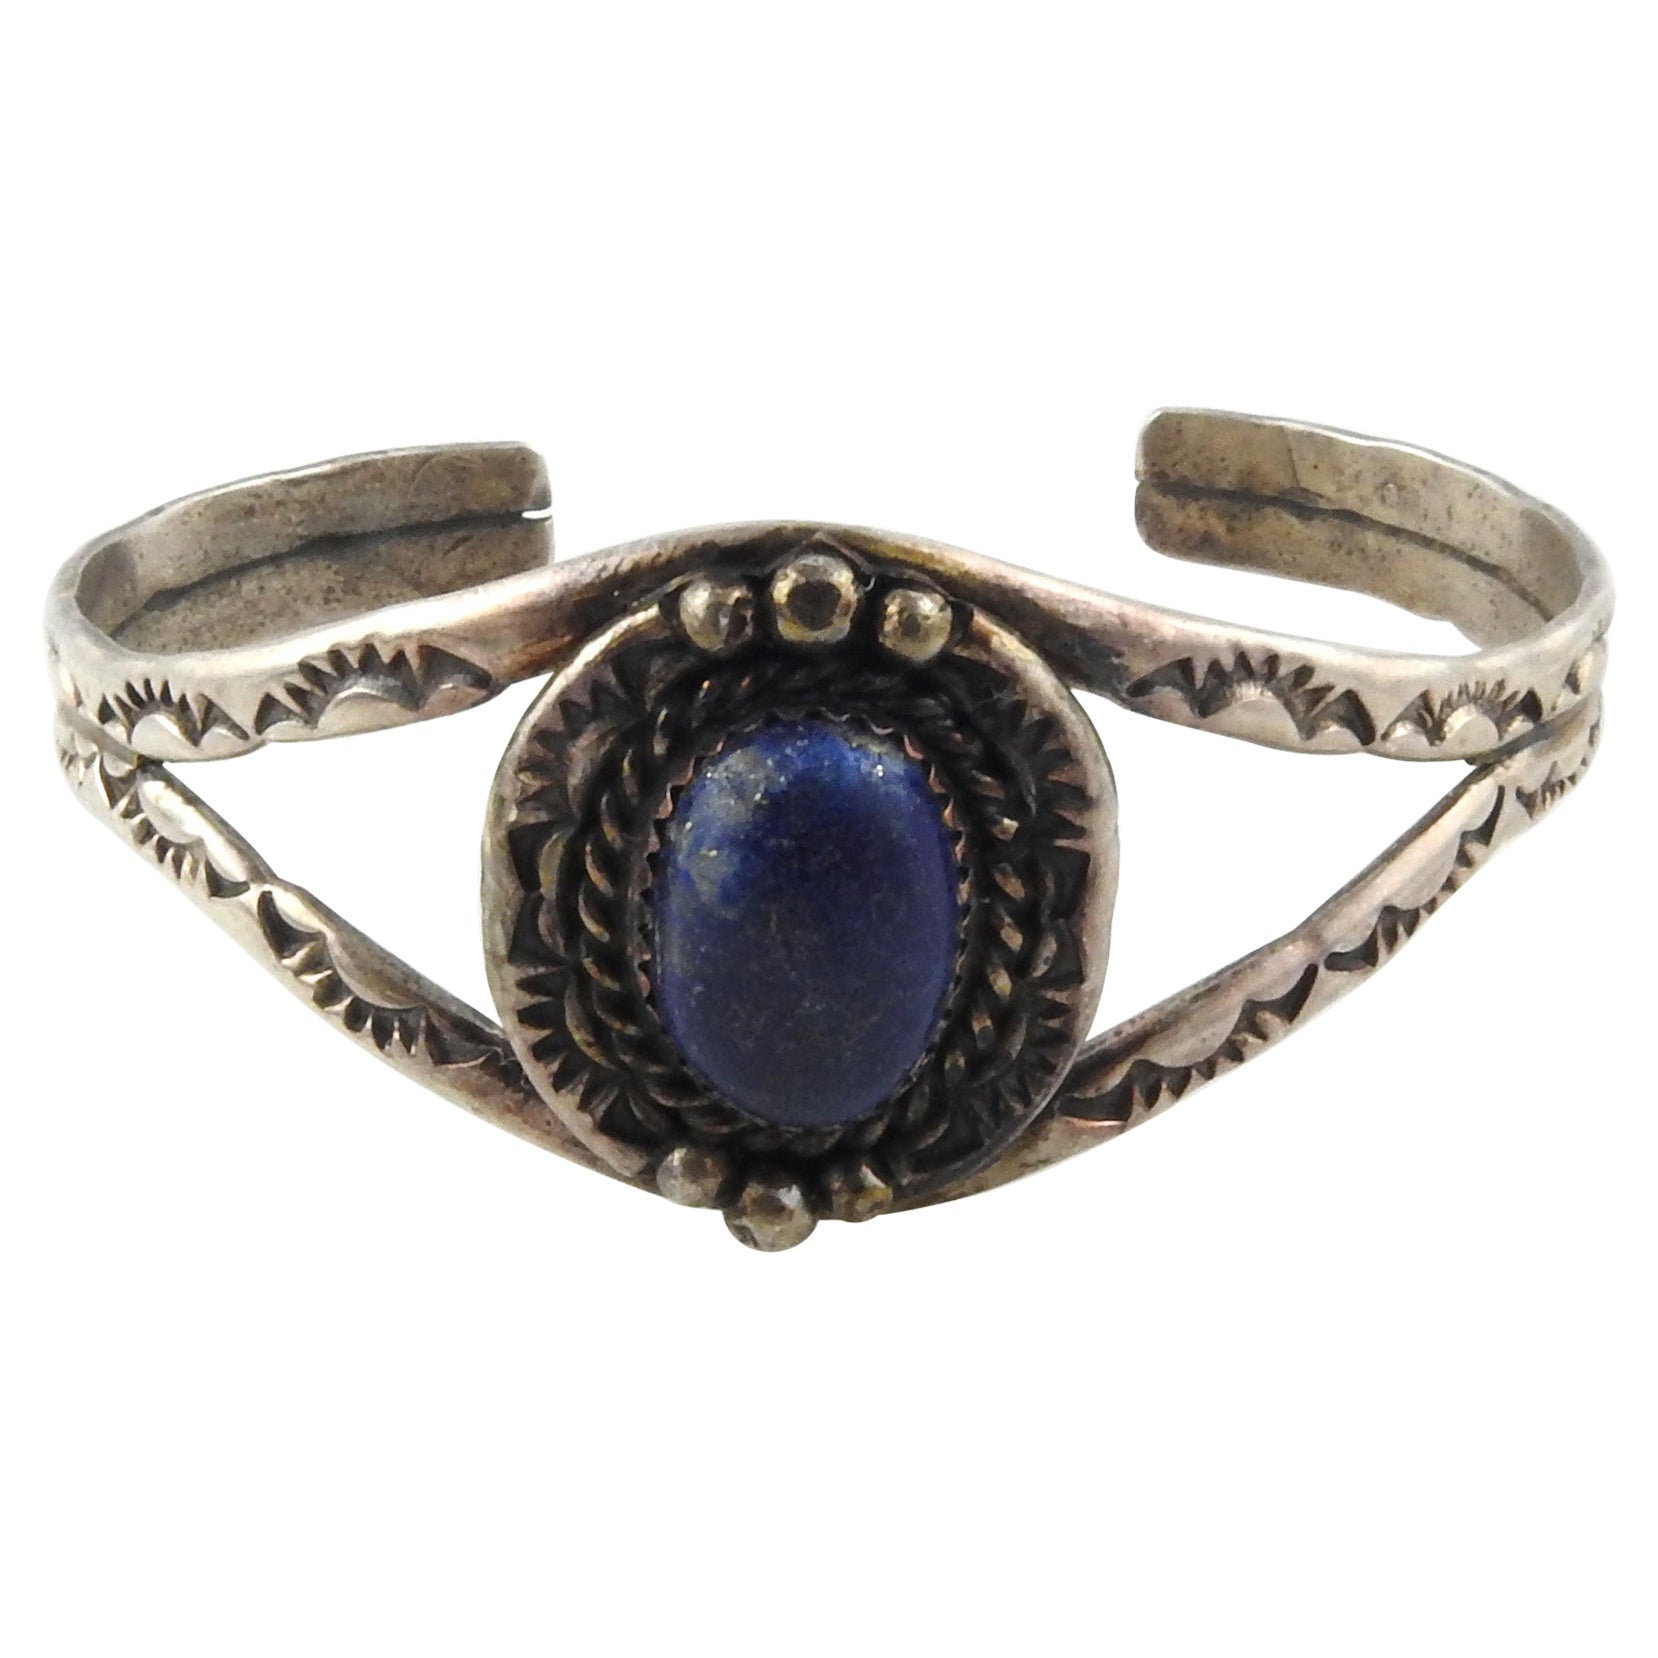 Native American Diné Begaye Sterling Silver Lapis Cuff